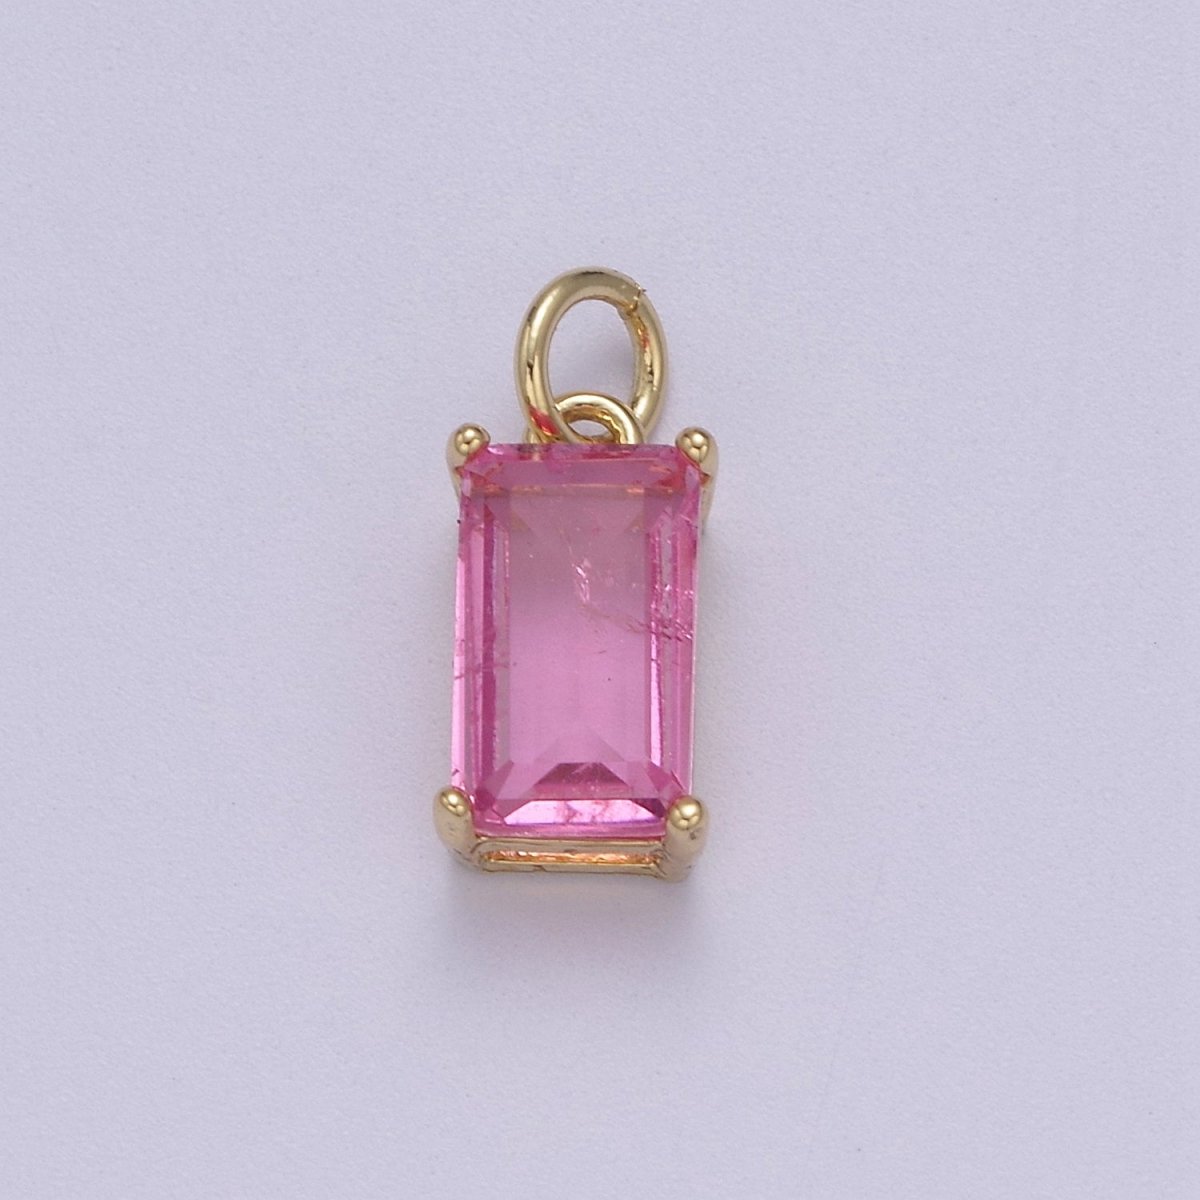 Dainty Cubic AB, Yellow, Blue, Teal, Green, Pink, Red 24k Gold Filled Solitaire Micro Pave Pendant Rectangle Emerald Diamond Cut Square Cz Stone Pendant for Birthstone Add on Charm C-707,C-712,C-713,C-716,C-743,C-773~C-779 - DLUXCA